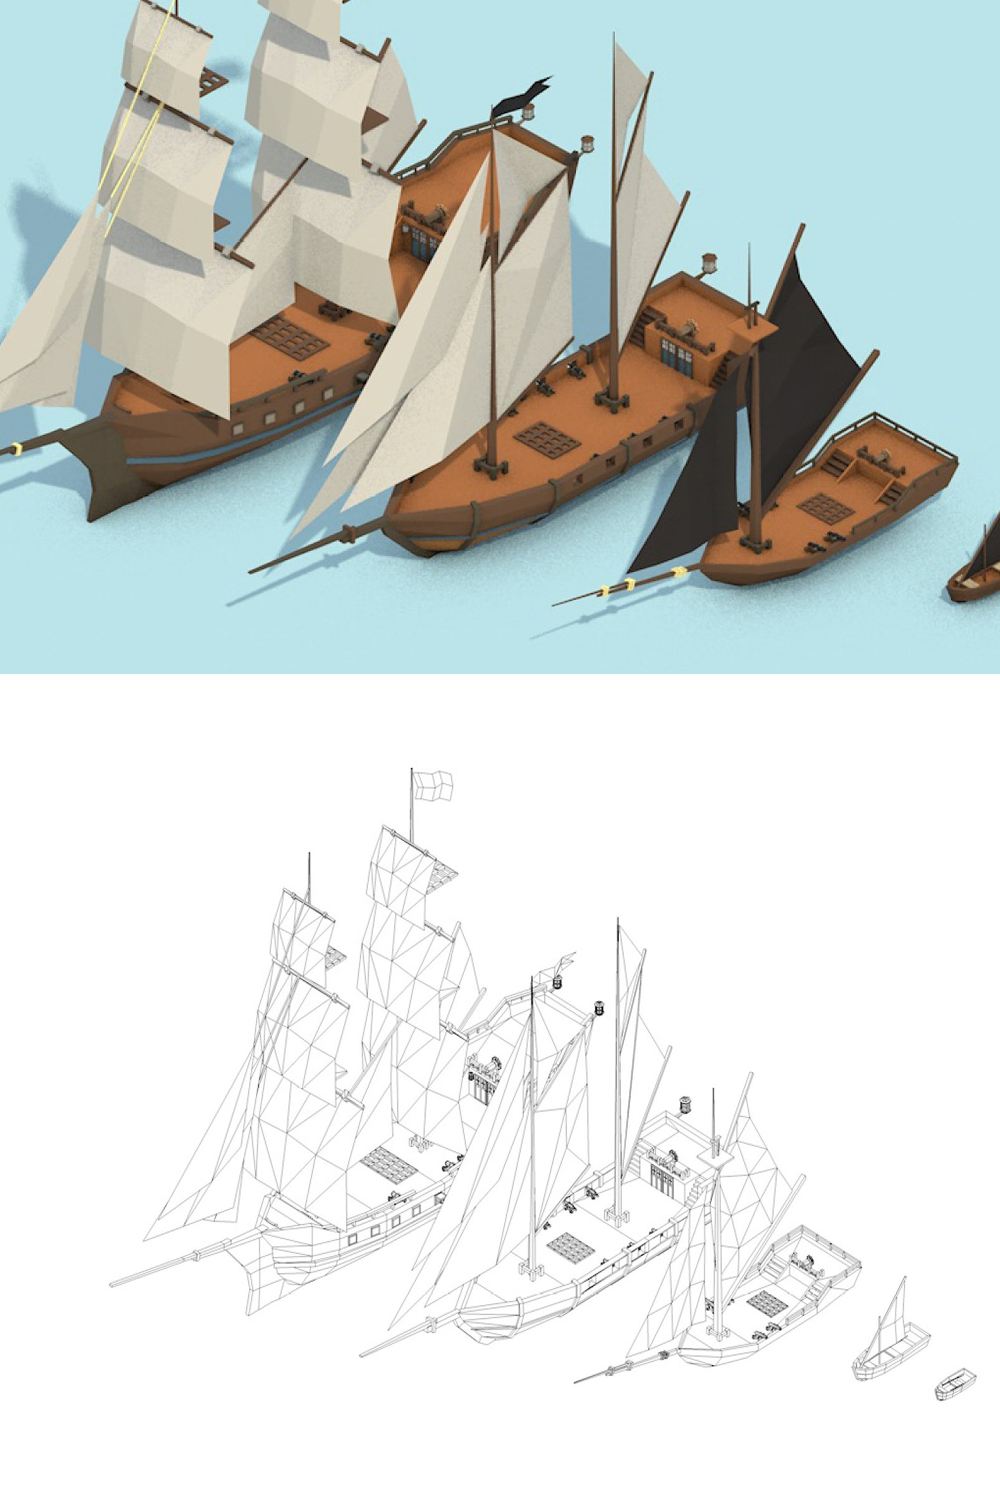 Images low poly pirate ships of pinterest.